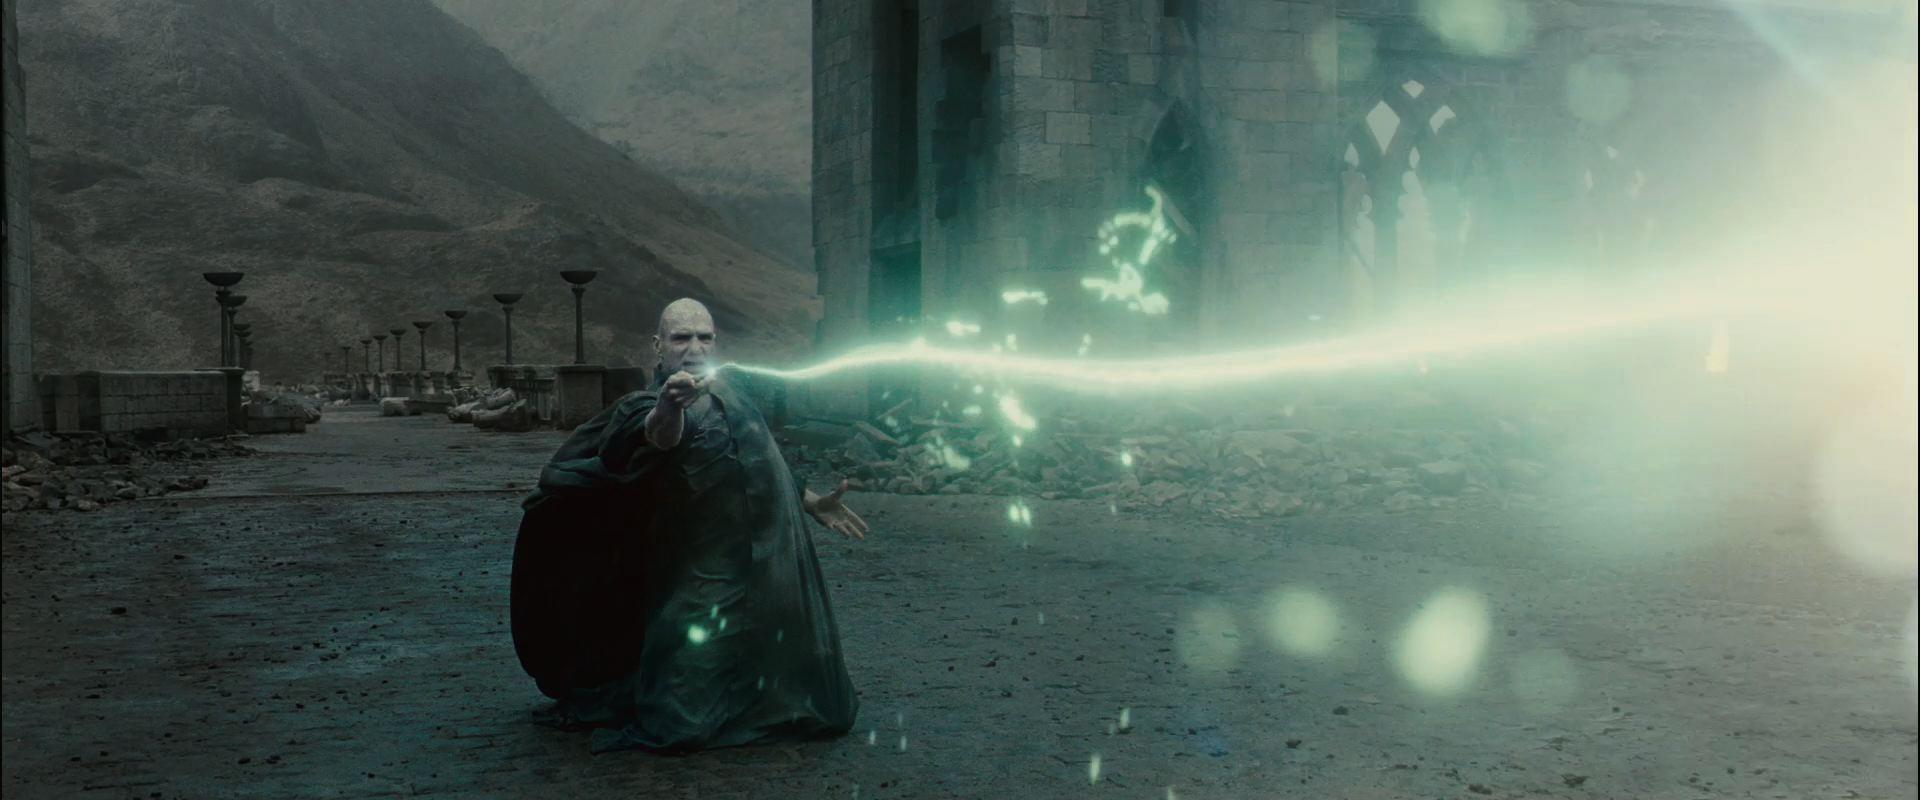 Lord Voldemort Dueling from Harry Potter and the Deathly Hallows